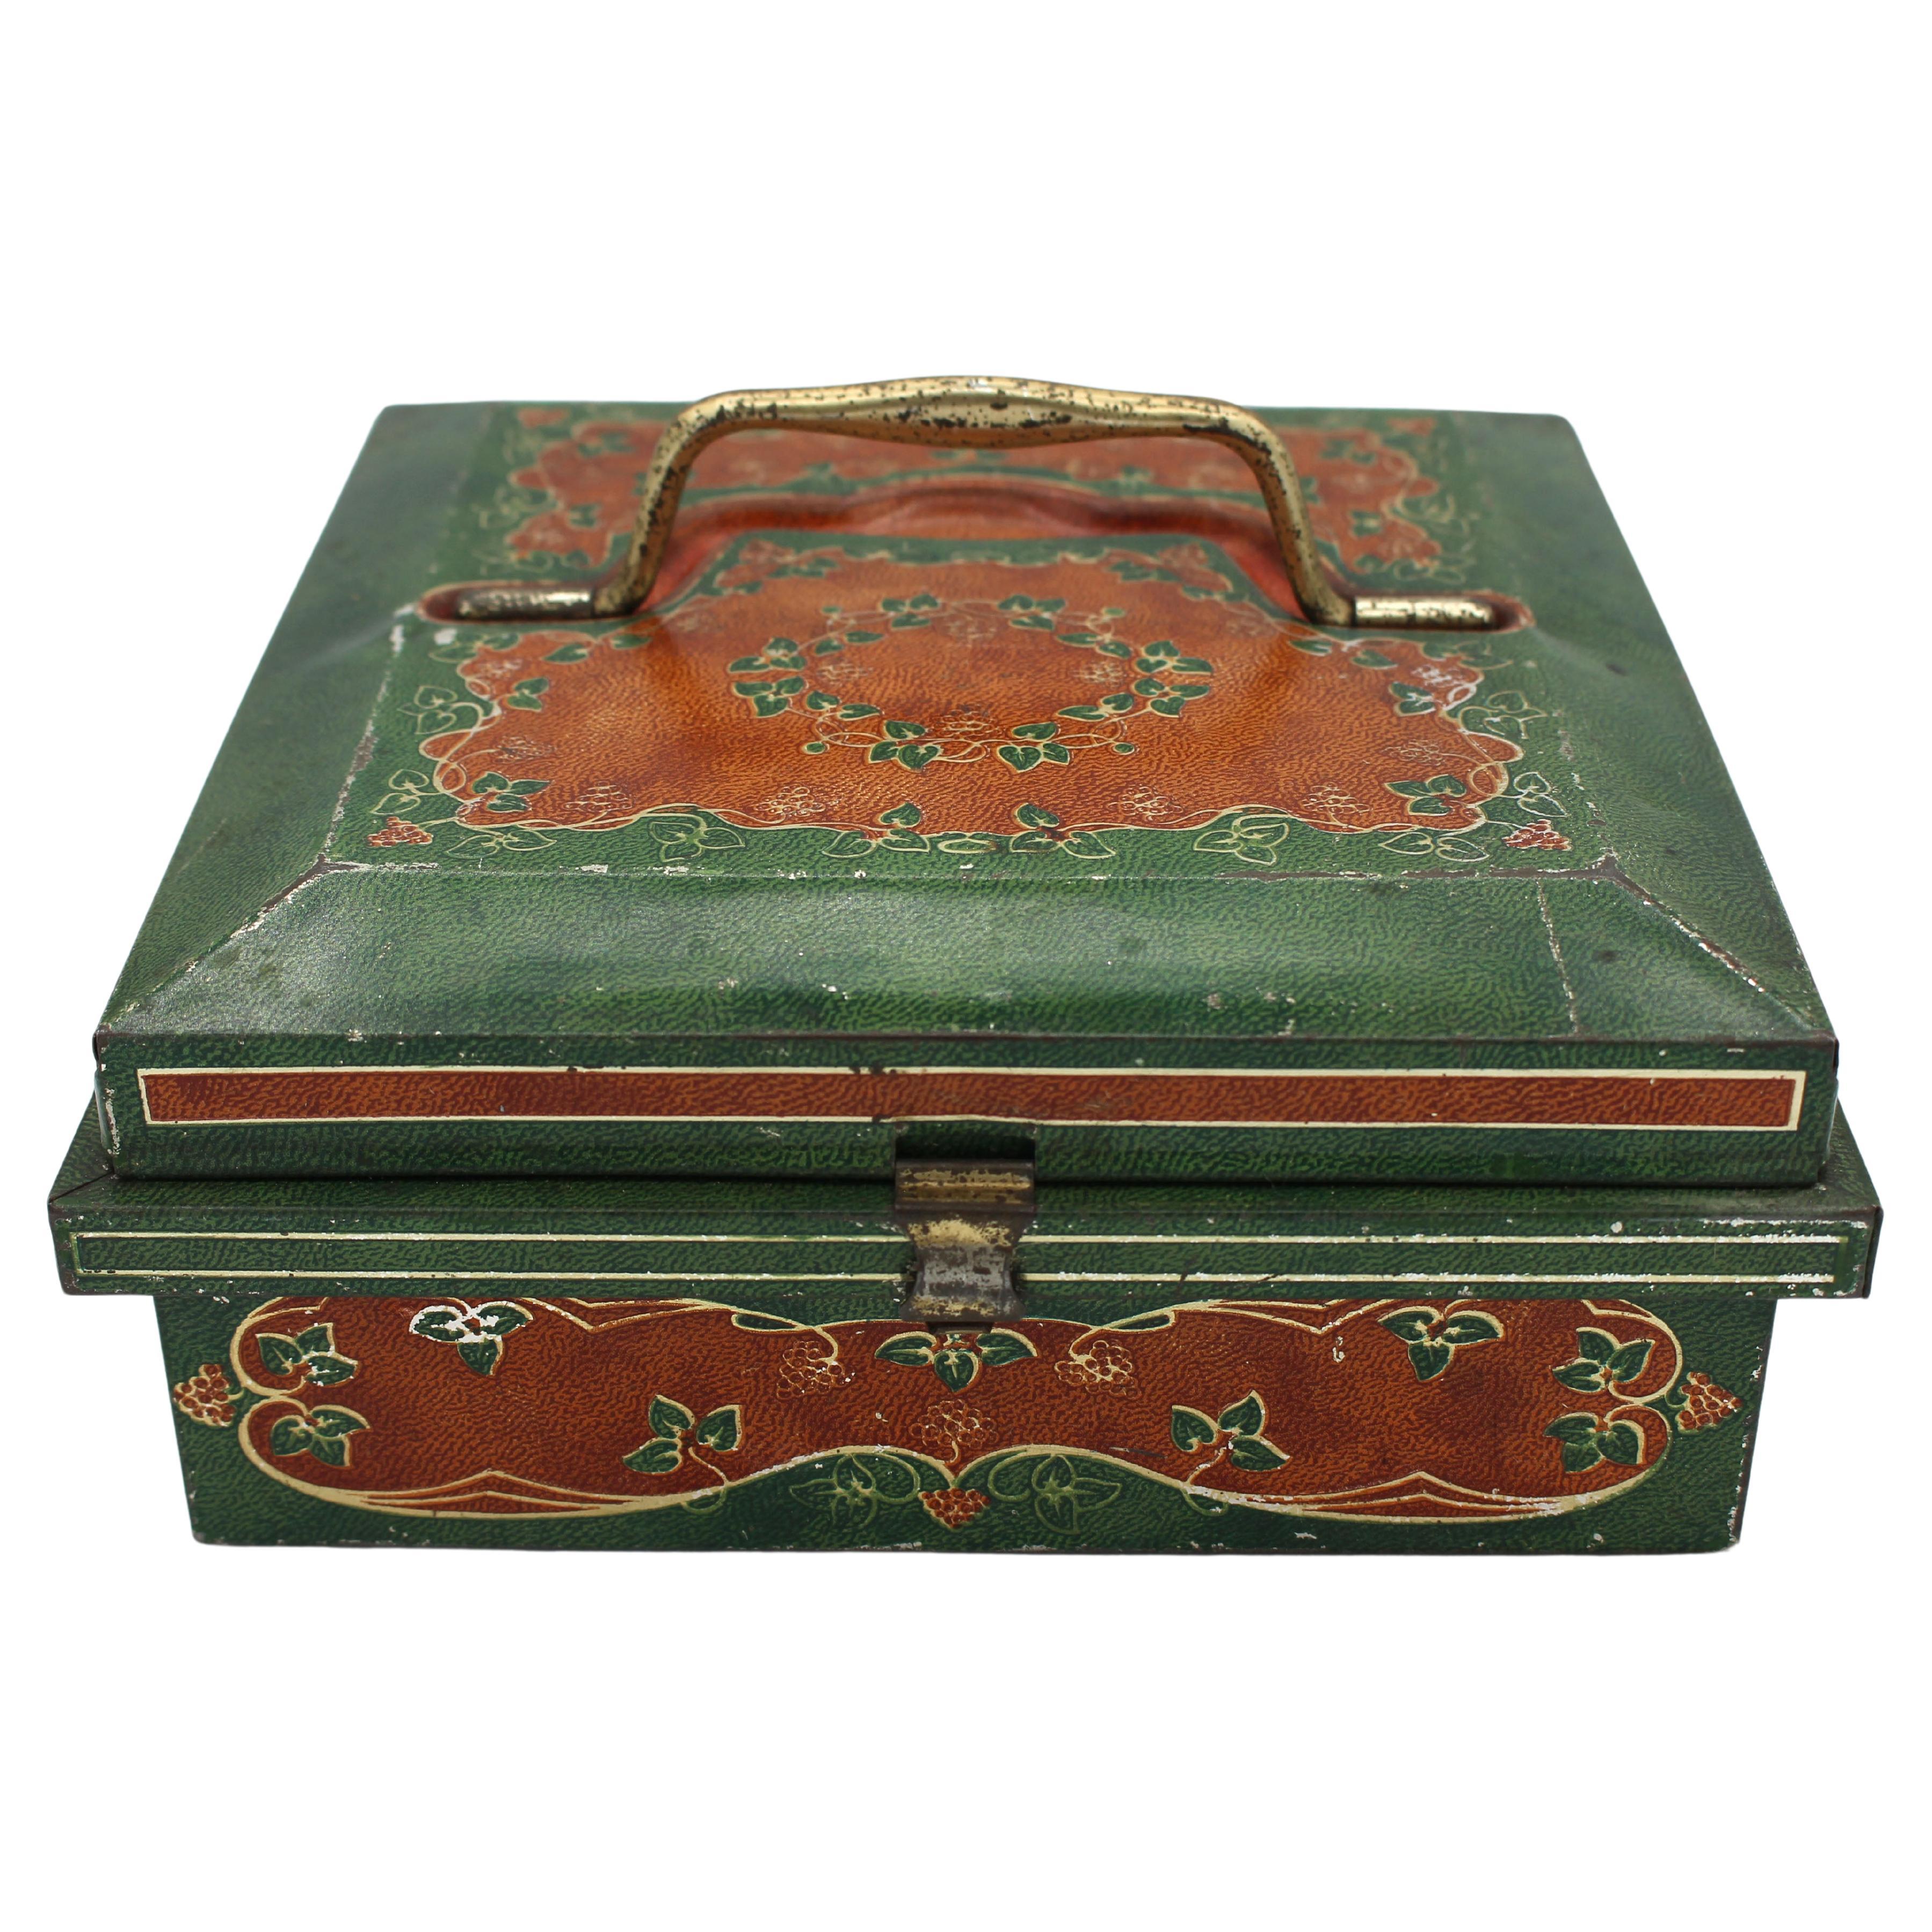 1903 Huntley & Palmers Jewelry Casket Form Biscuit Tin Box